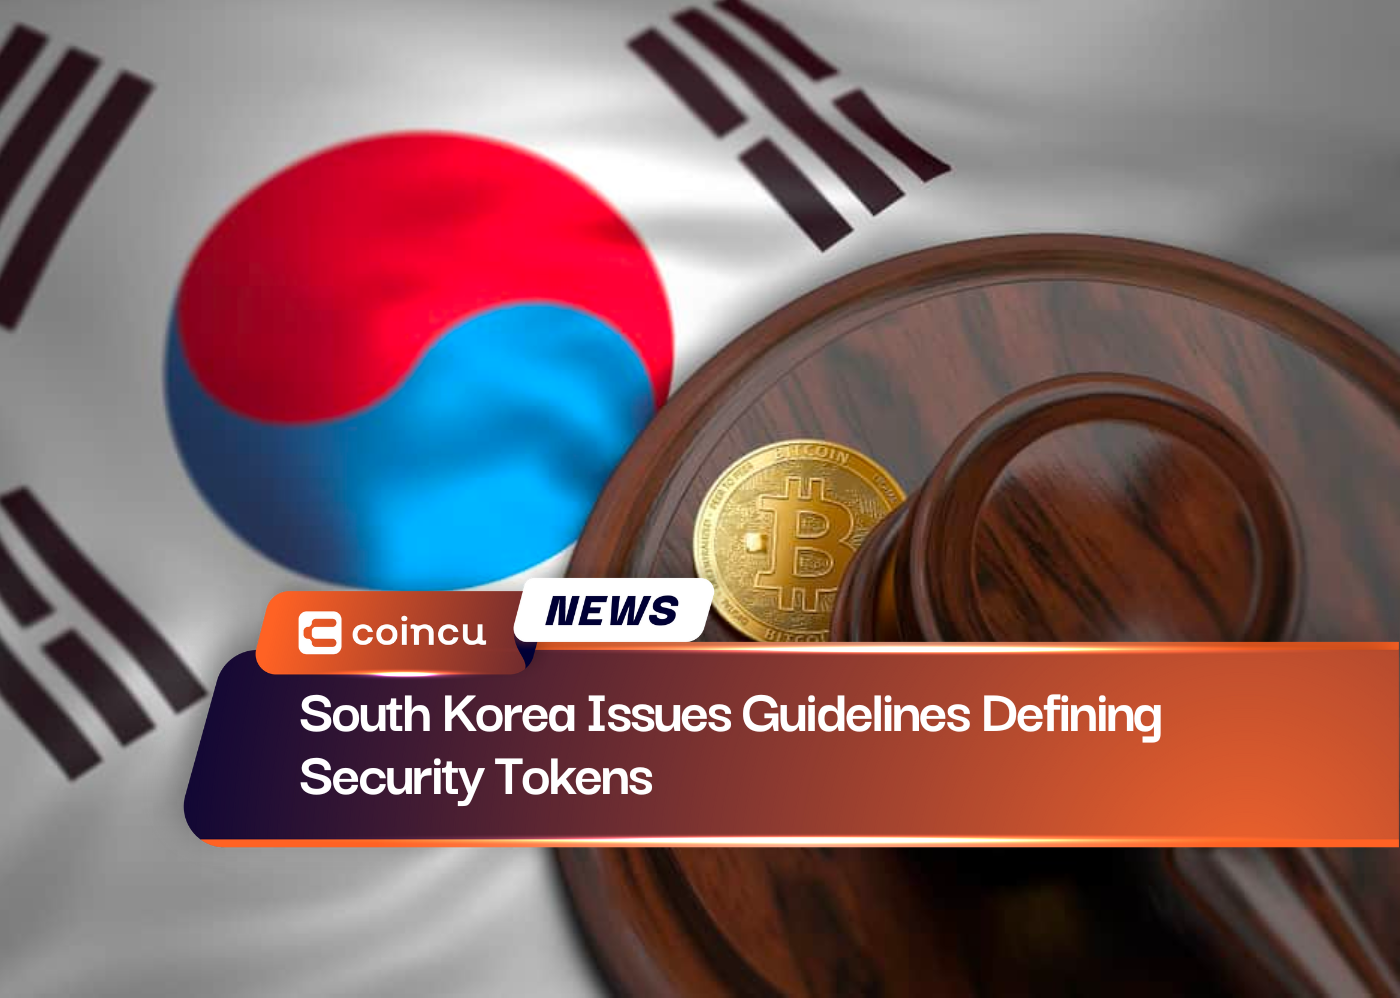 South Korea Issues Guidelines Defining Security Tokens